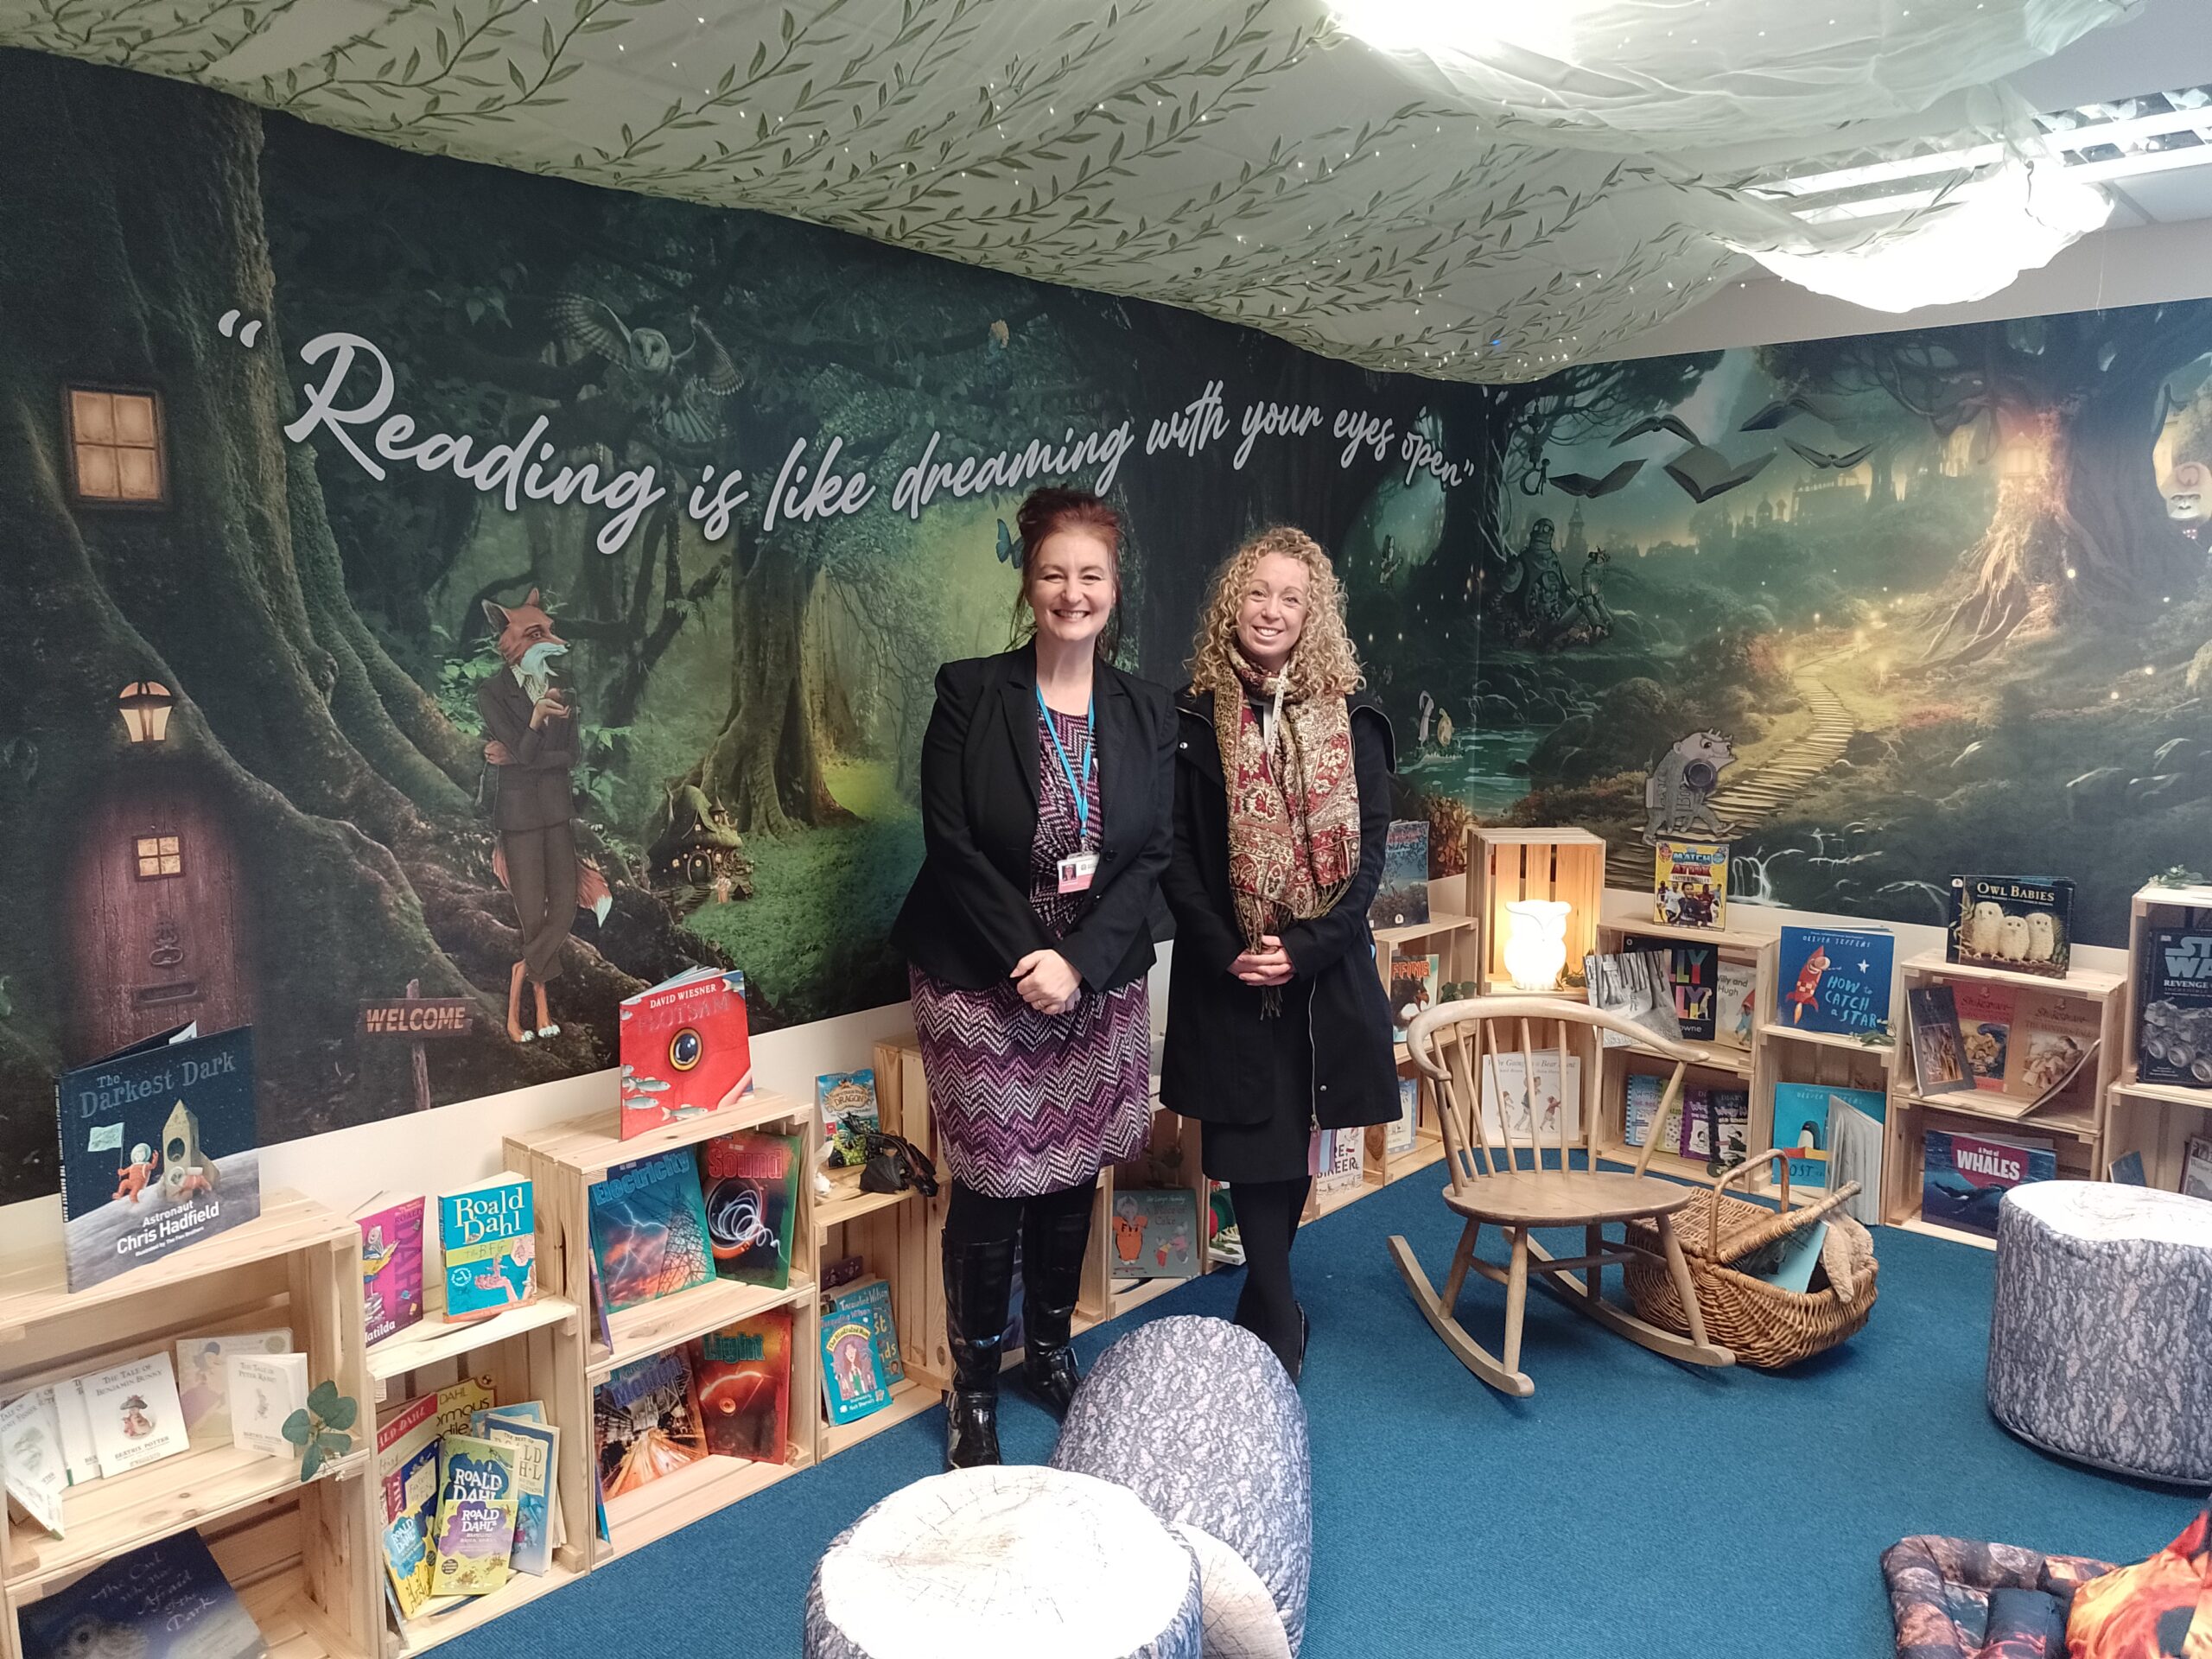 (L-R) Laura Stridgeon, Cradle to Career programme manager LCR and Gemma Snell, interim headteacher at Hallwood Park Primary School and Nursery